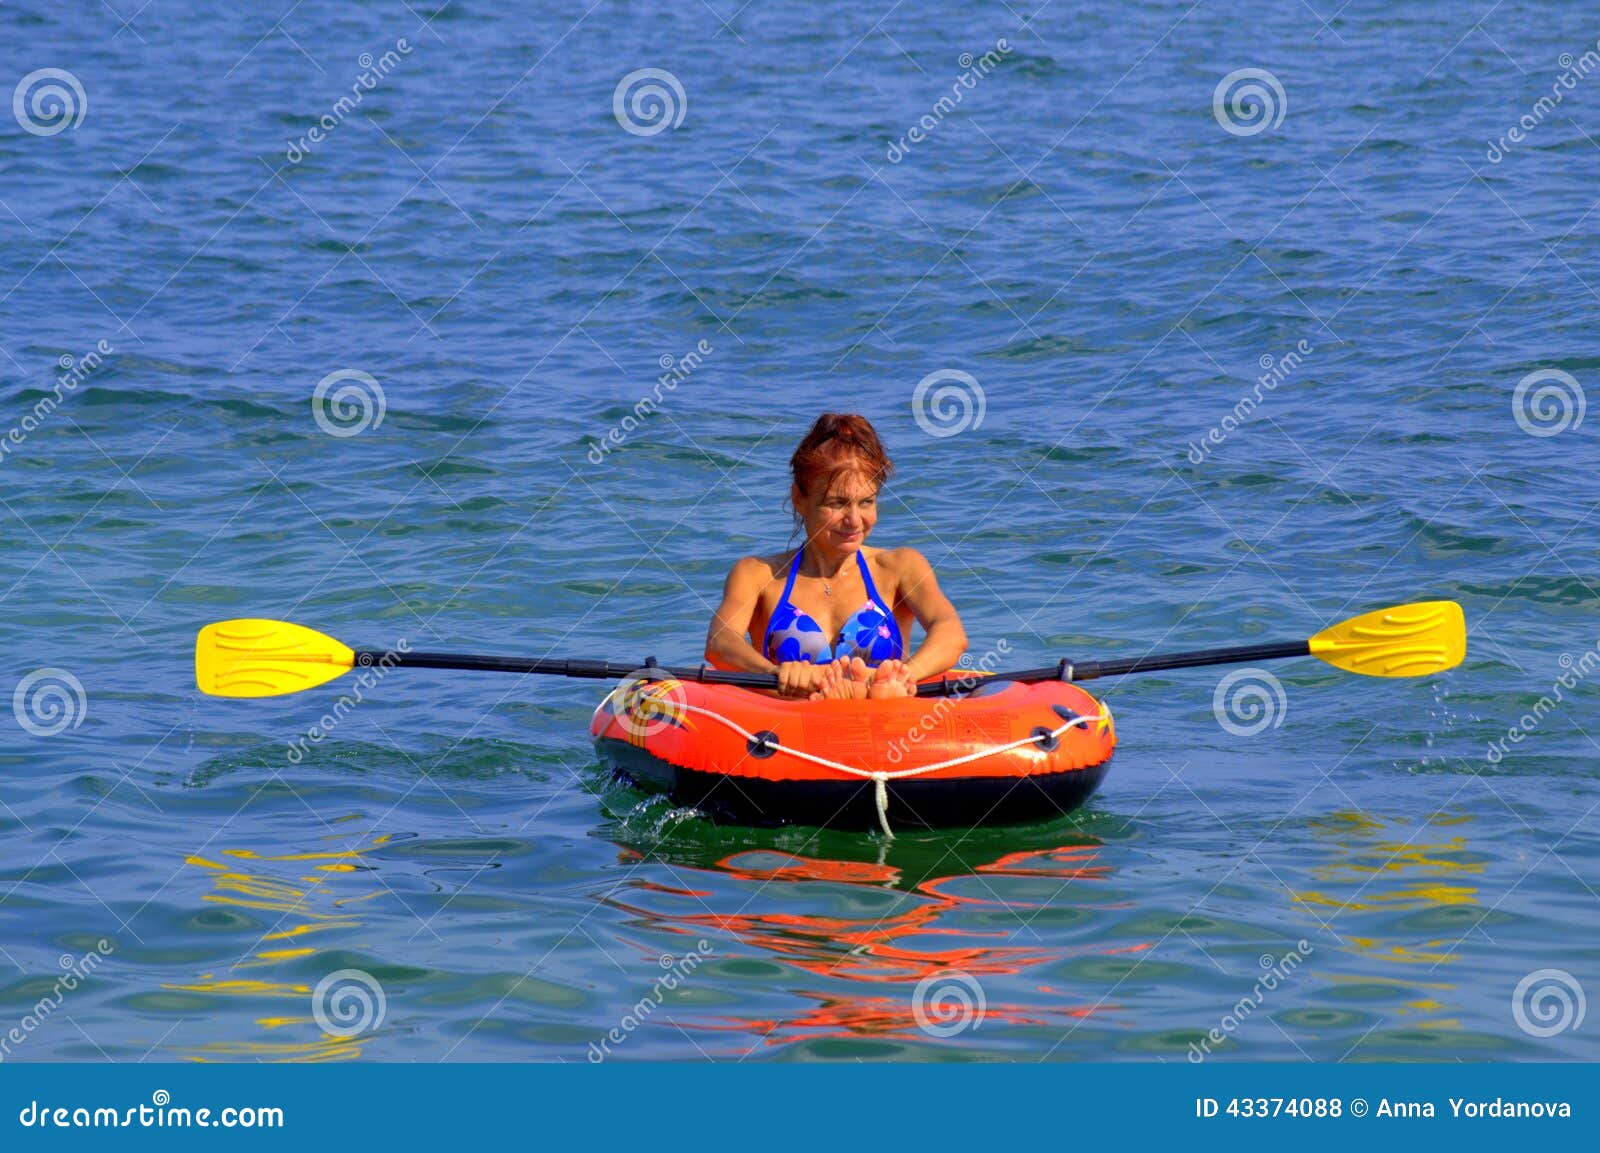 Woman row boat stock photo. Image of colorful, august 